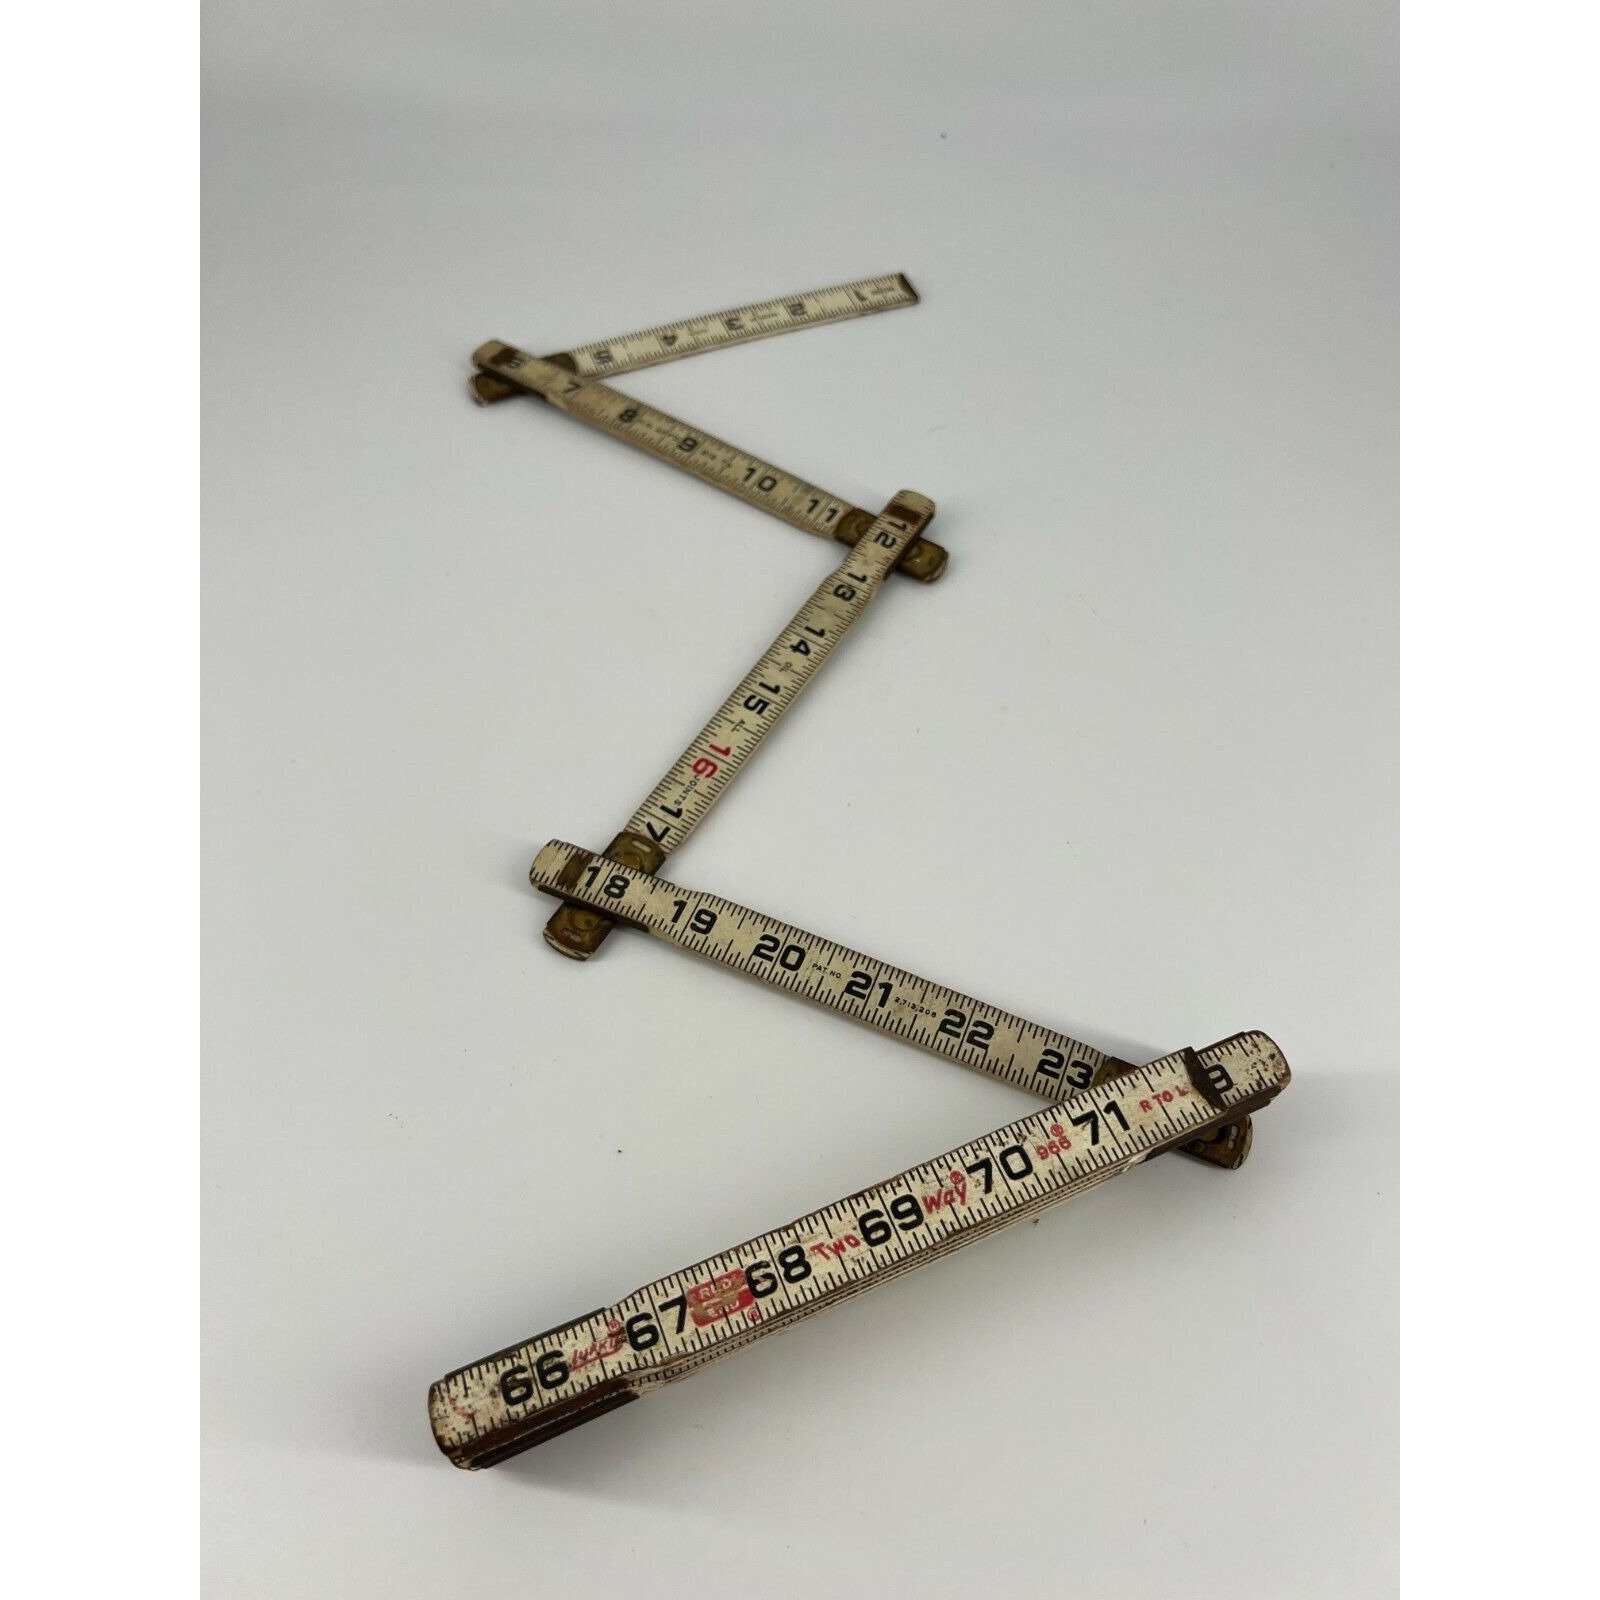 Folding Meter/Yard Stick 526 Reversible Centimeters/Inches/Feet